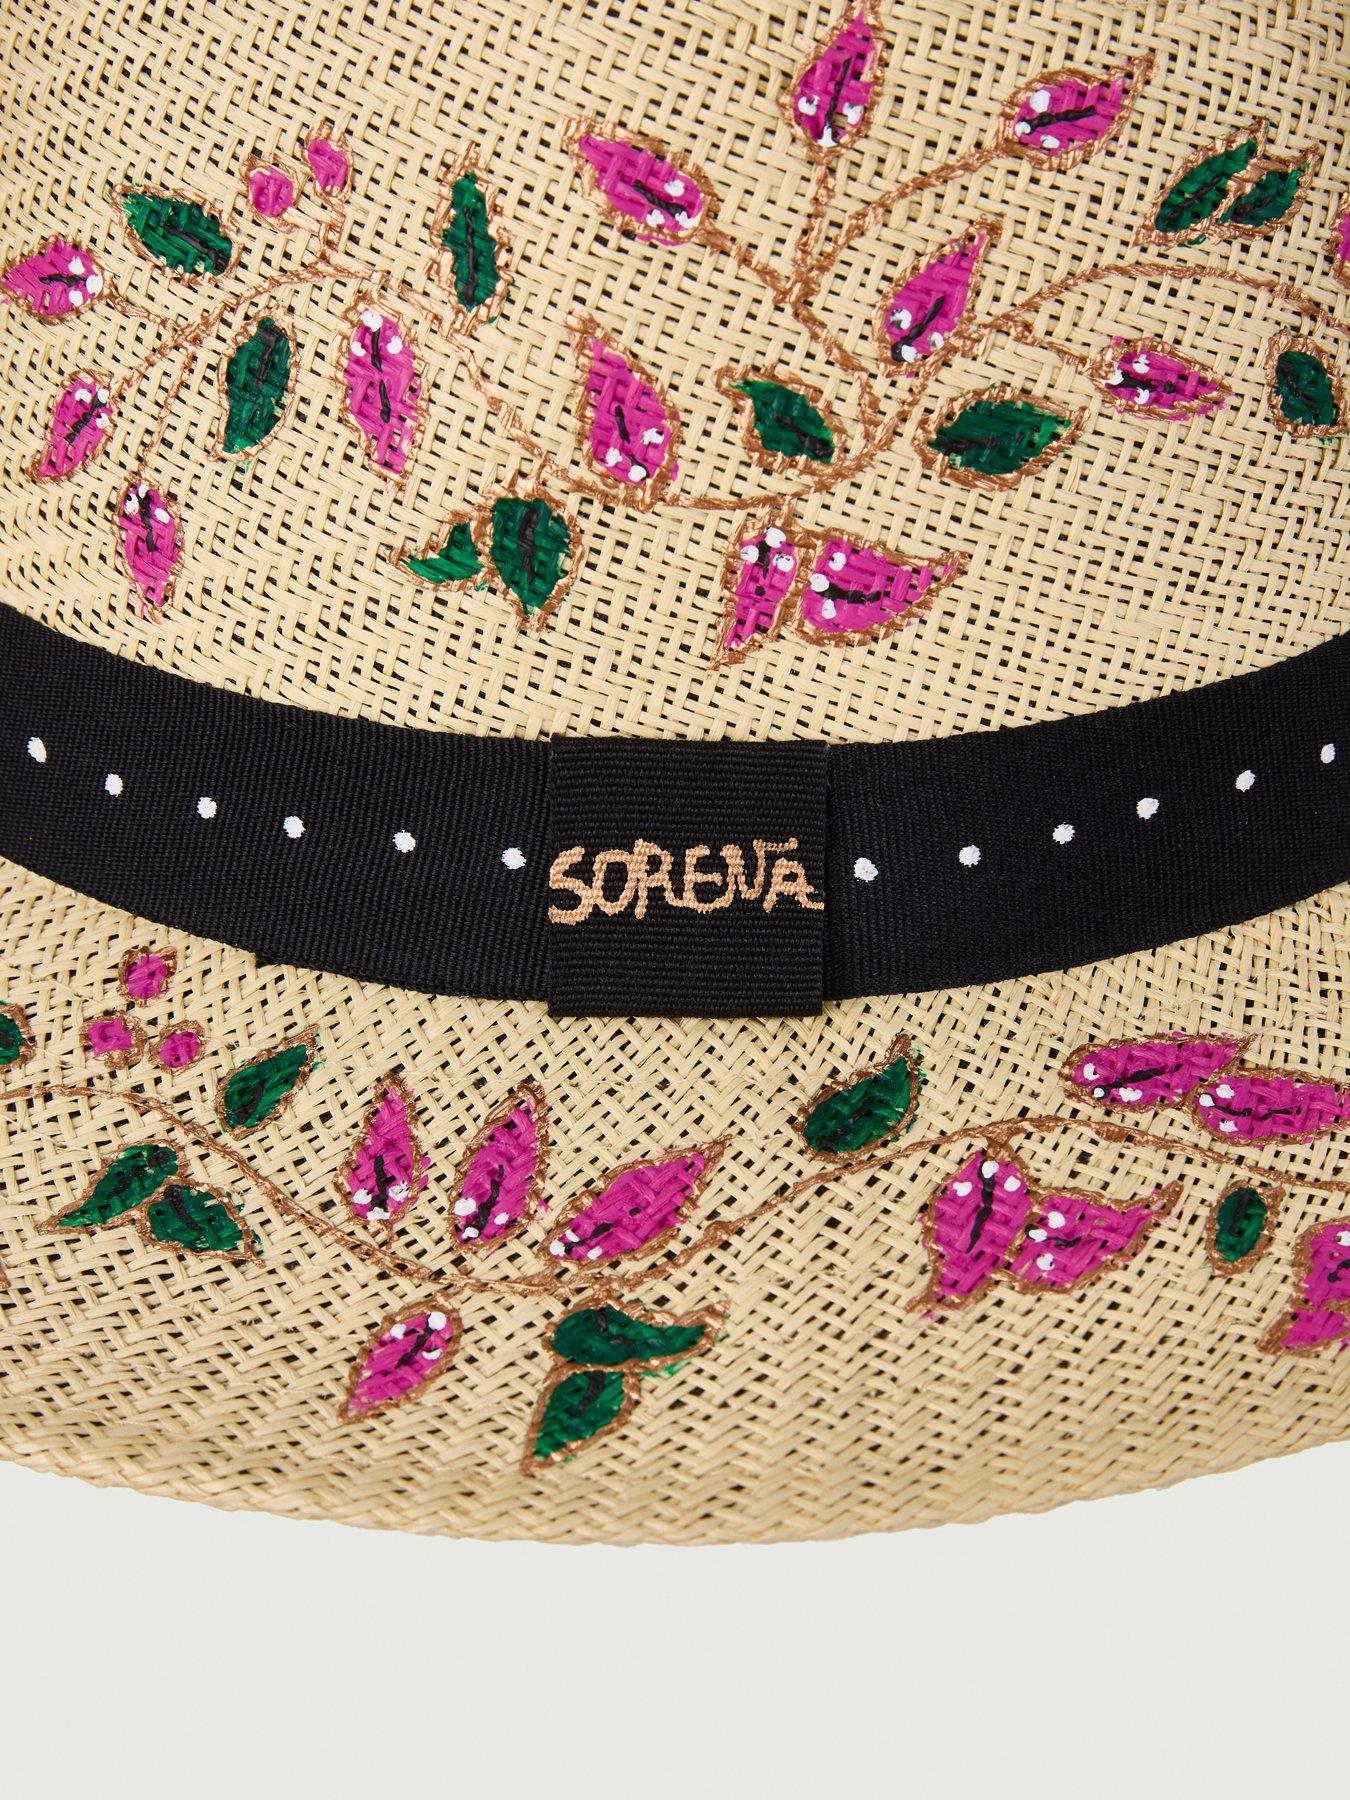 Sorena Painted Floral Straw Fedora Hat | Very.co.uk